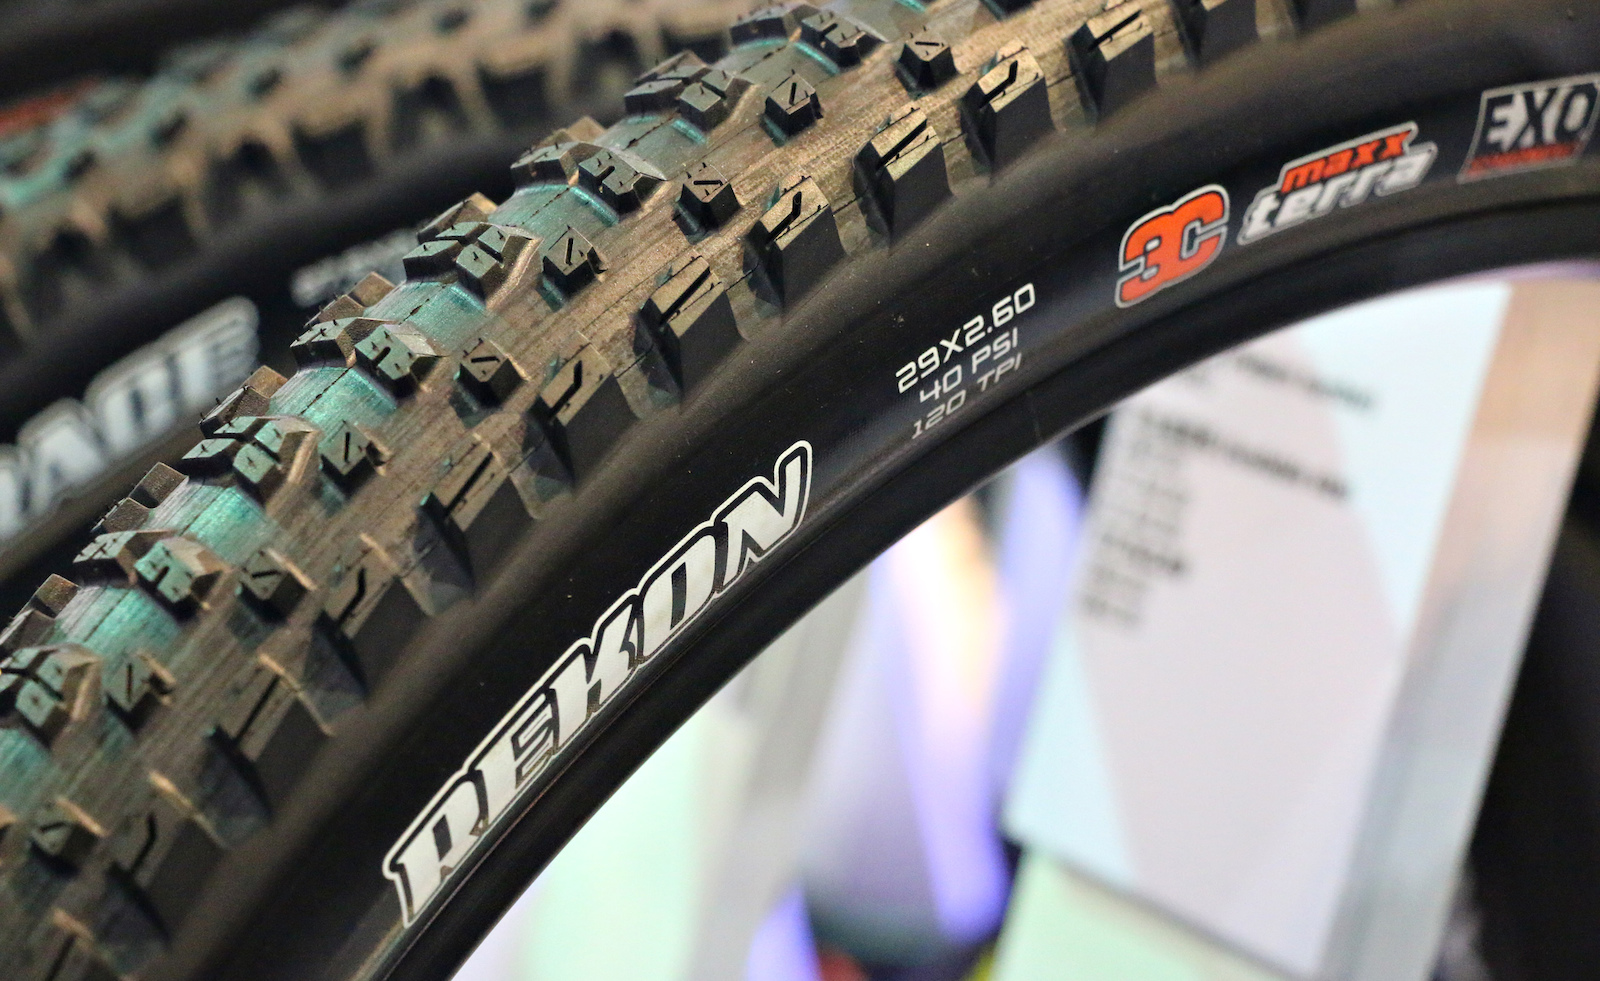 Maxxis Ardent Race Tire: 29 x 2.35" 3C, EXO, Tubeless Ready